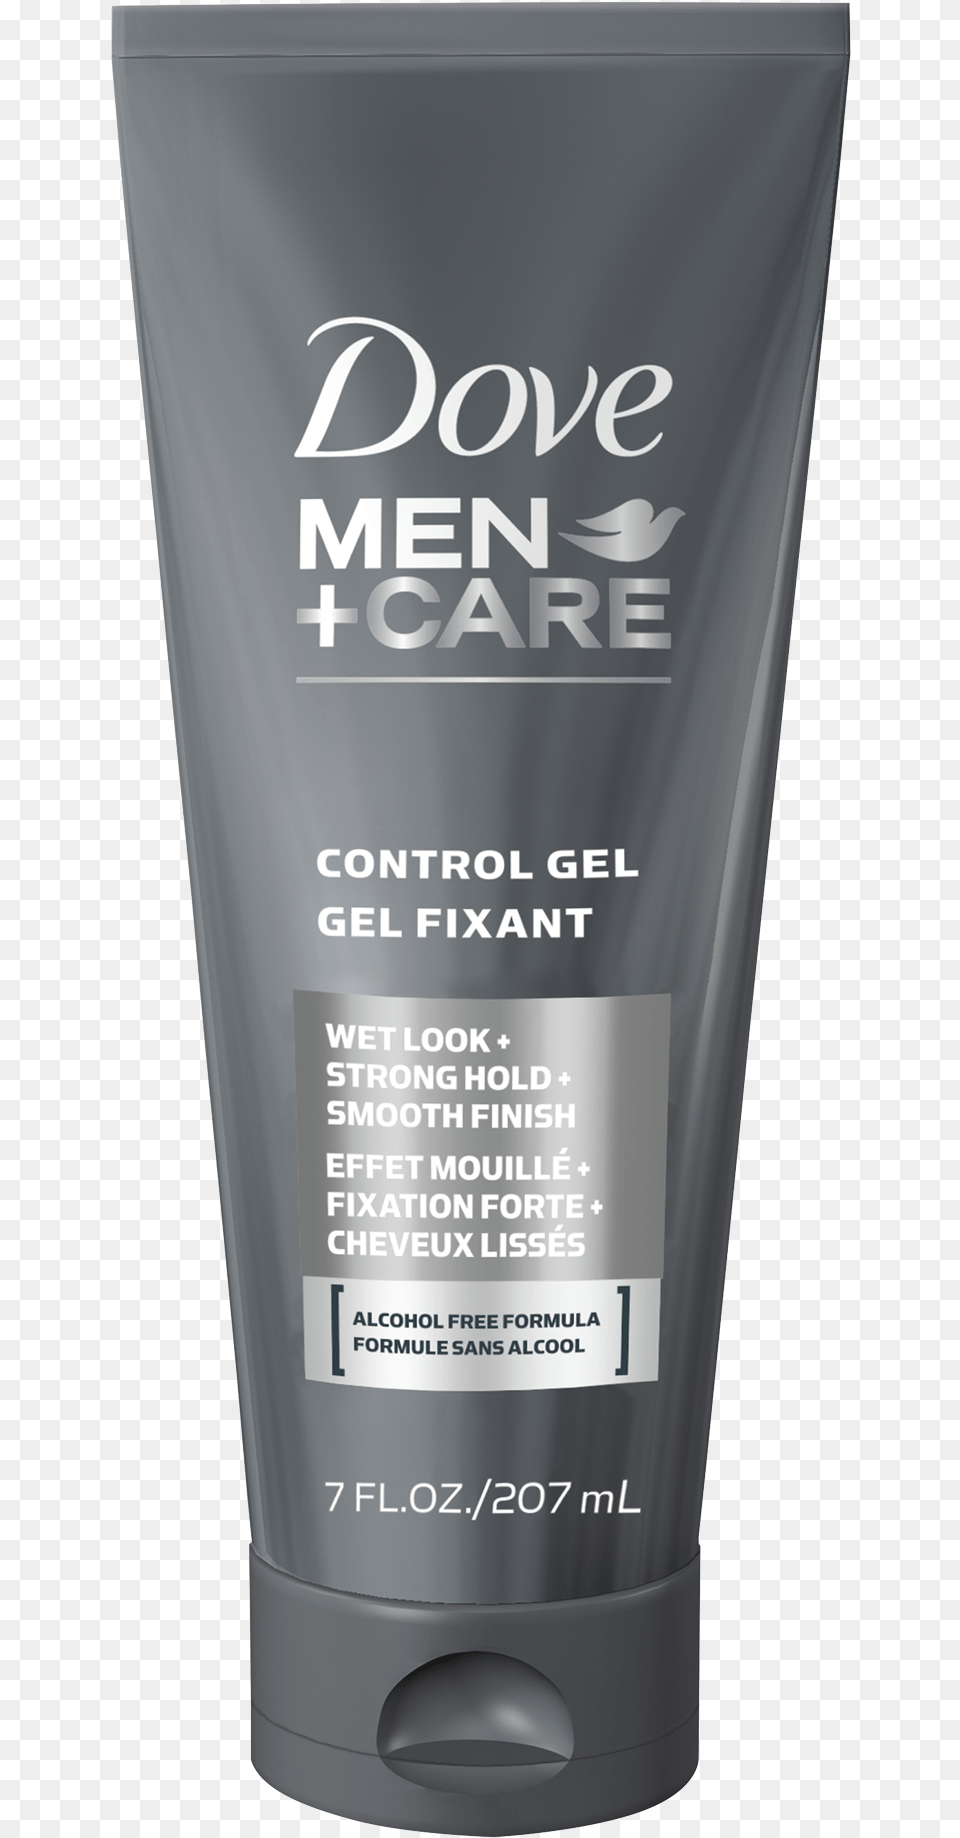 Men Care Control Gel 207ml Dove Men Care Hair Control Gel, Bottle, Aftershave, Cosmetics, Can Png